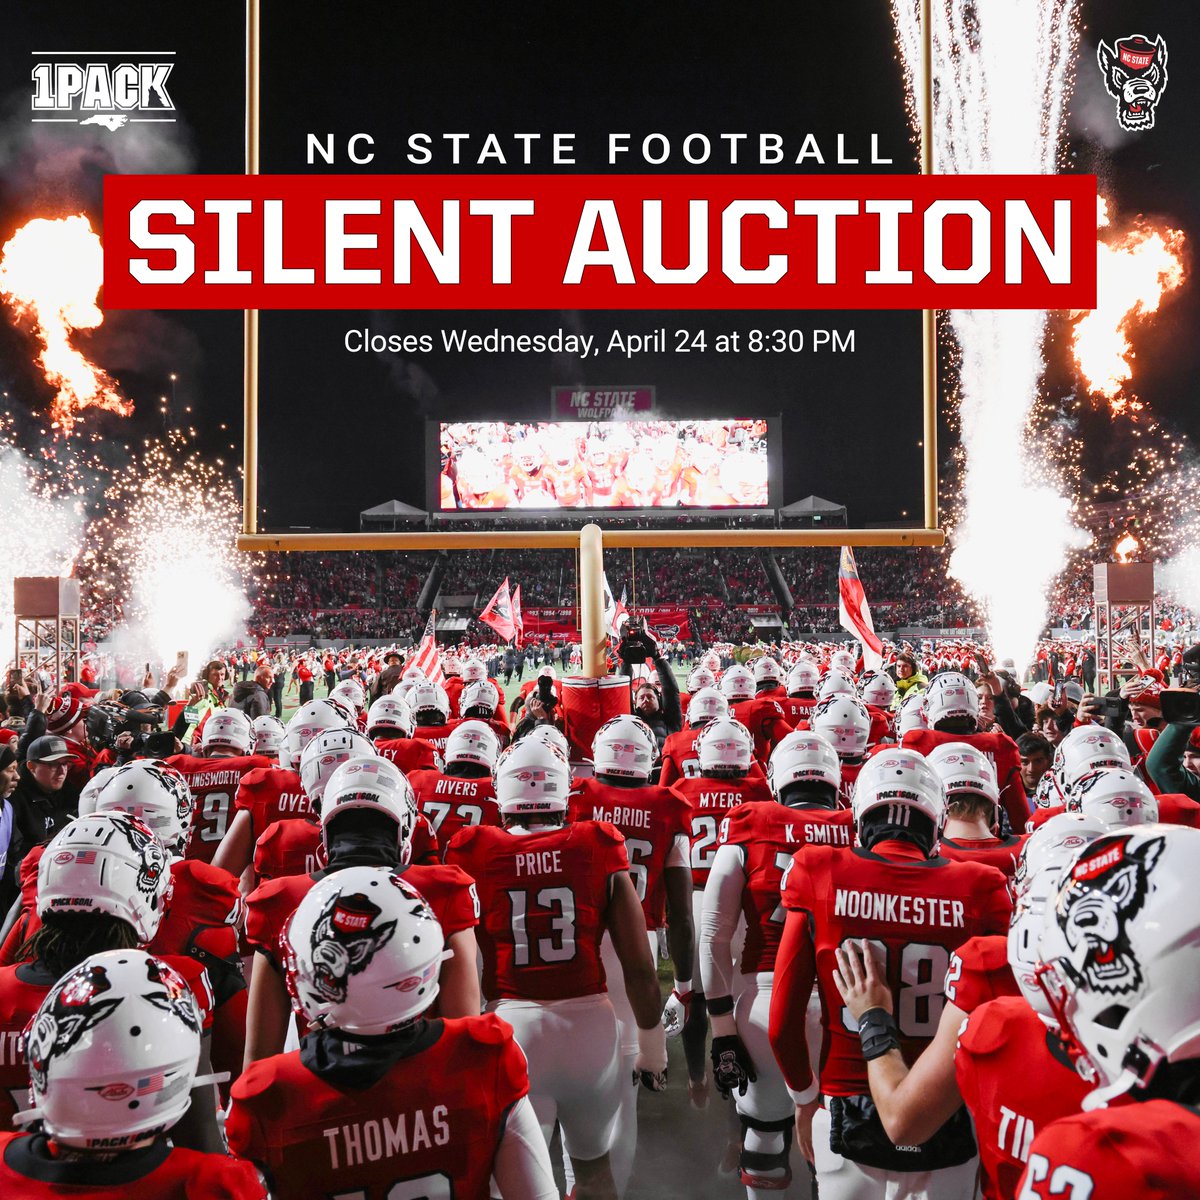 Only a few days left‼️ The clock is ticking down for your chance to win once-in-a-lifetime 2024 NC State football experiences, merchandise, and more at the @OnePackNIL Silent Auction. Bid today: bit.ly/3Jutsun #GoPack